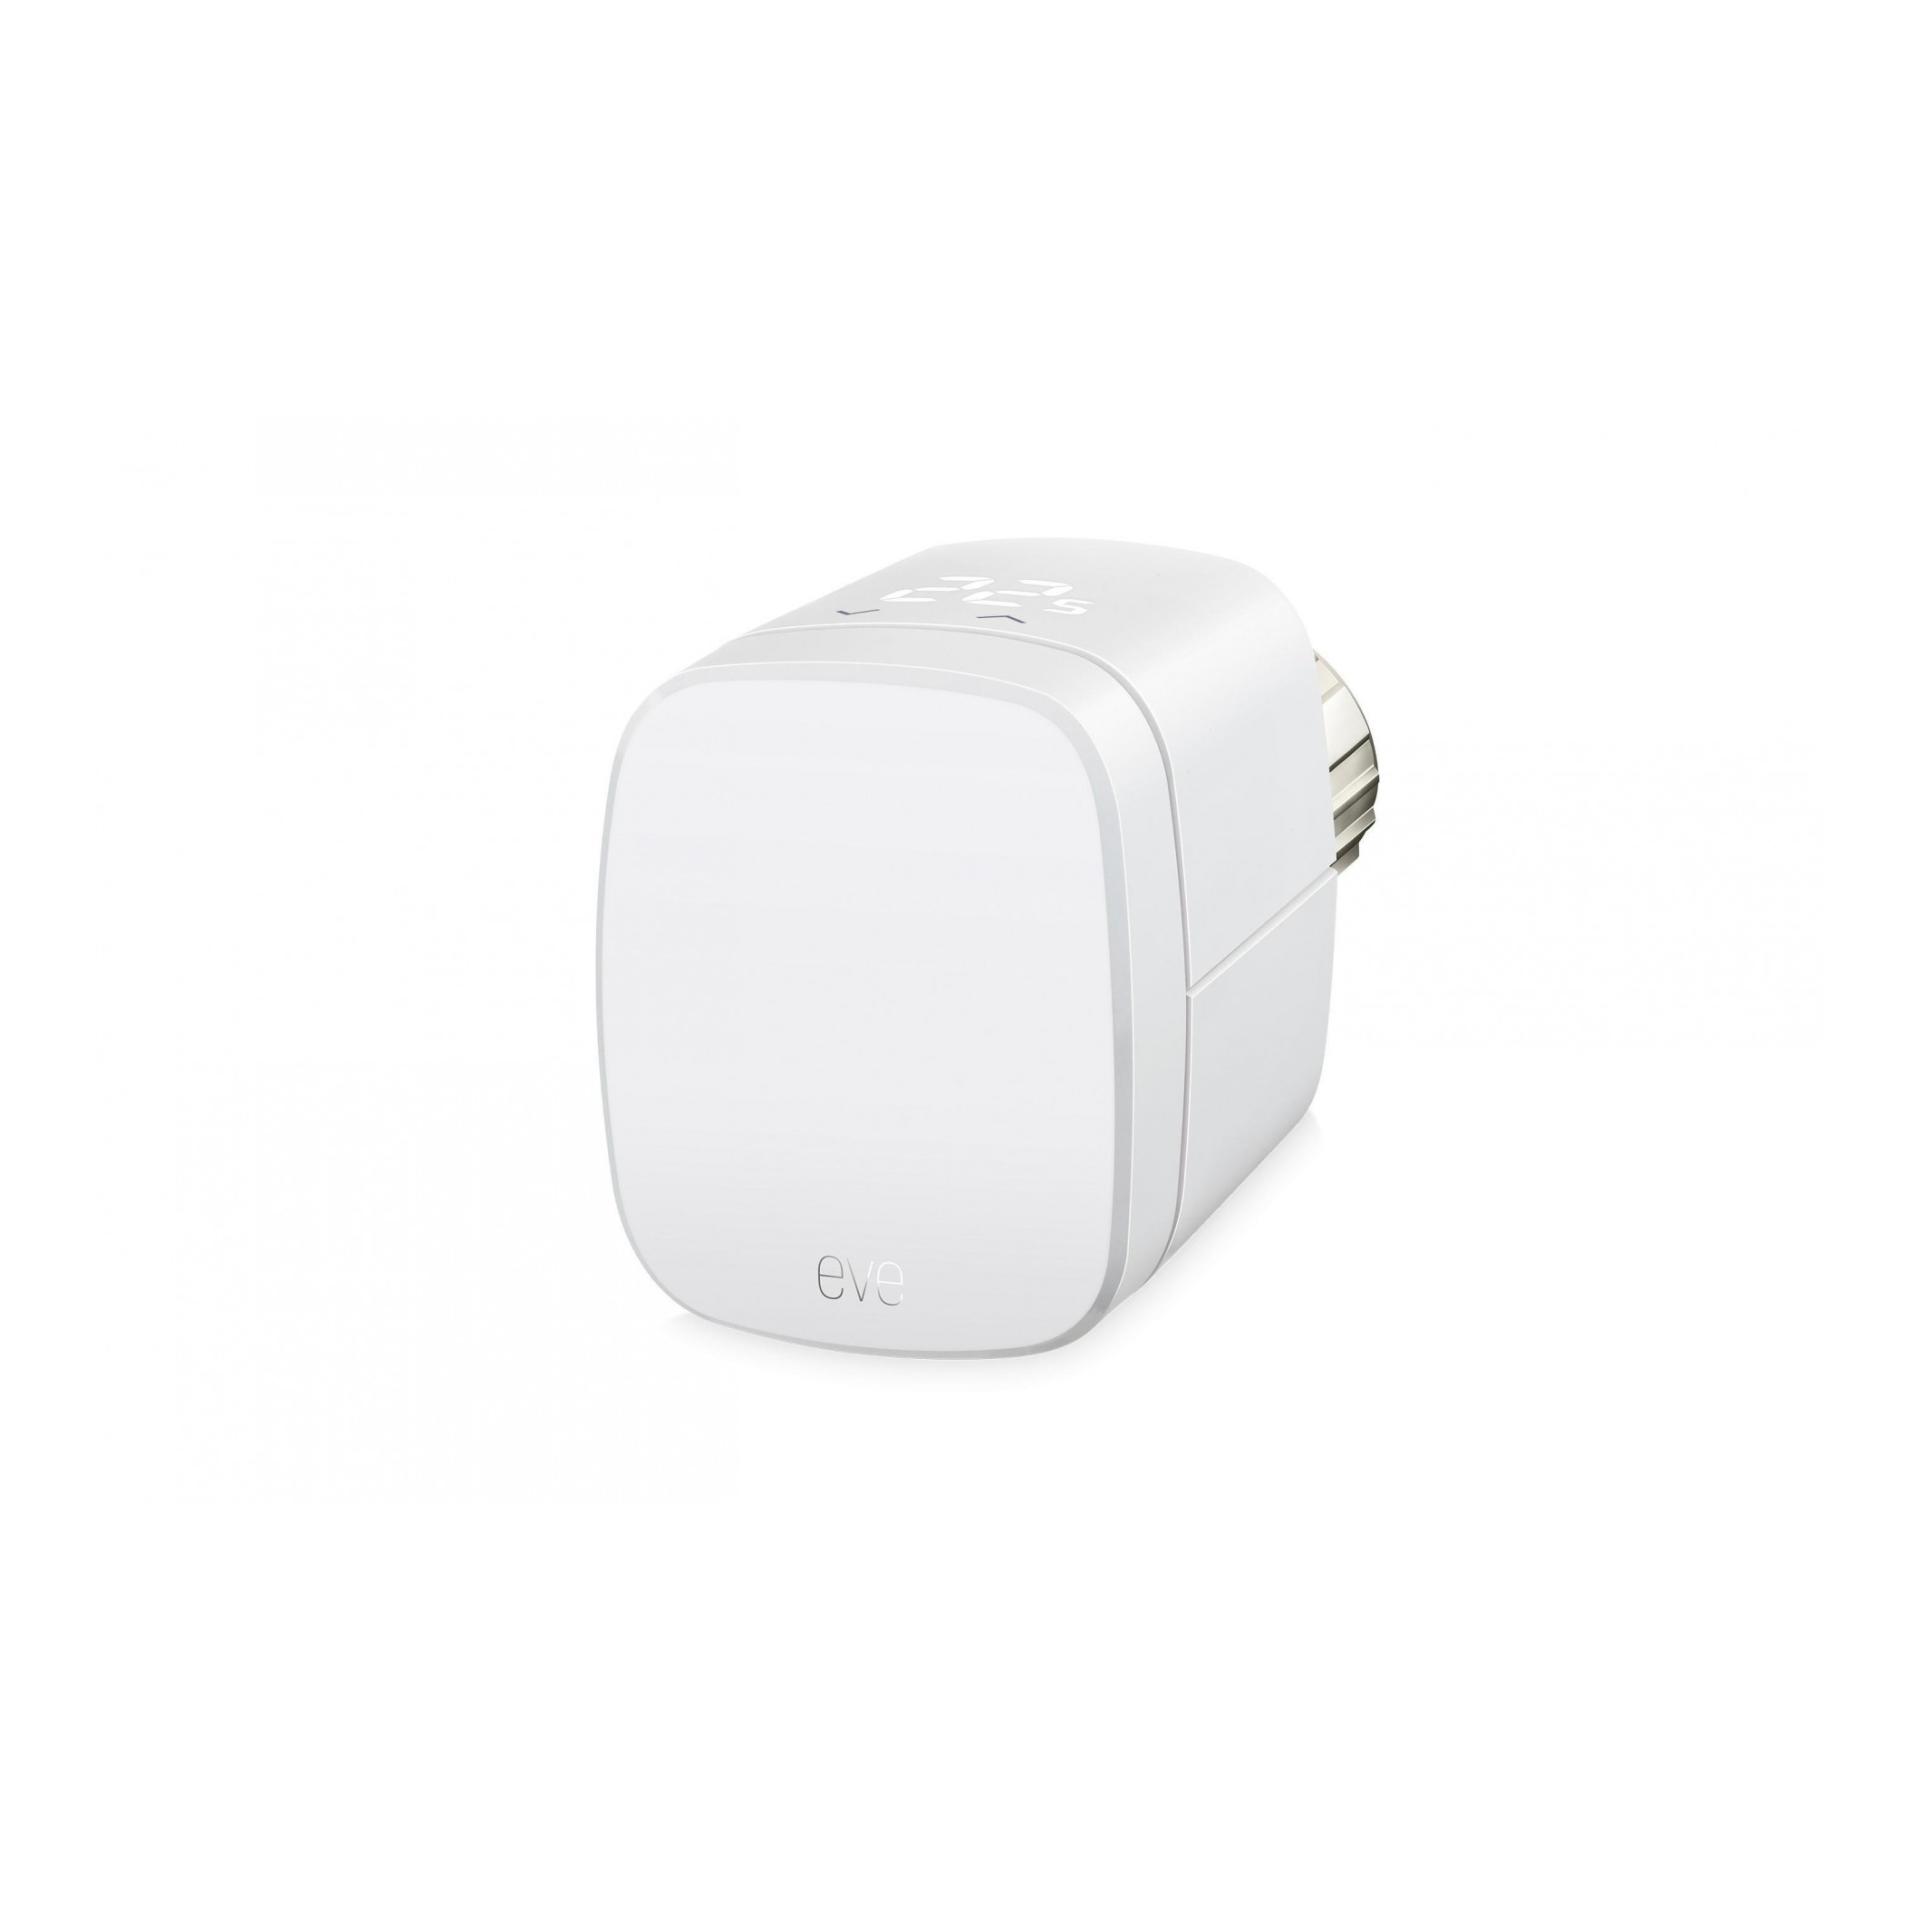 Eve Systems Thermo radiator thermostat with Apple HomeKit - White